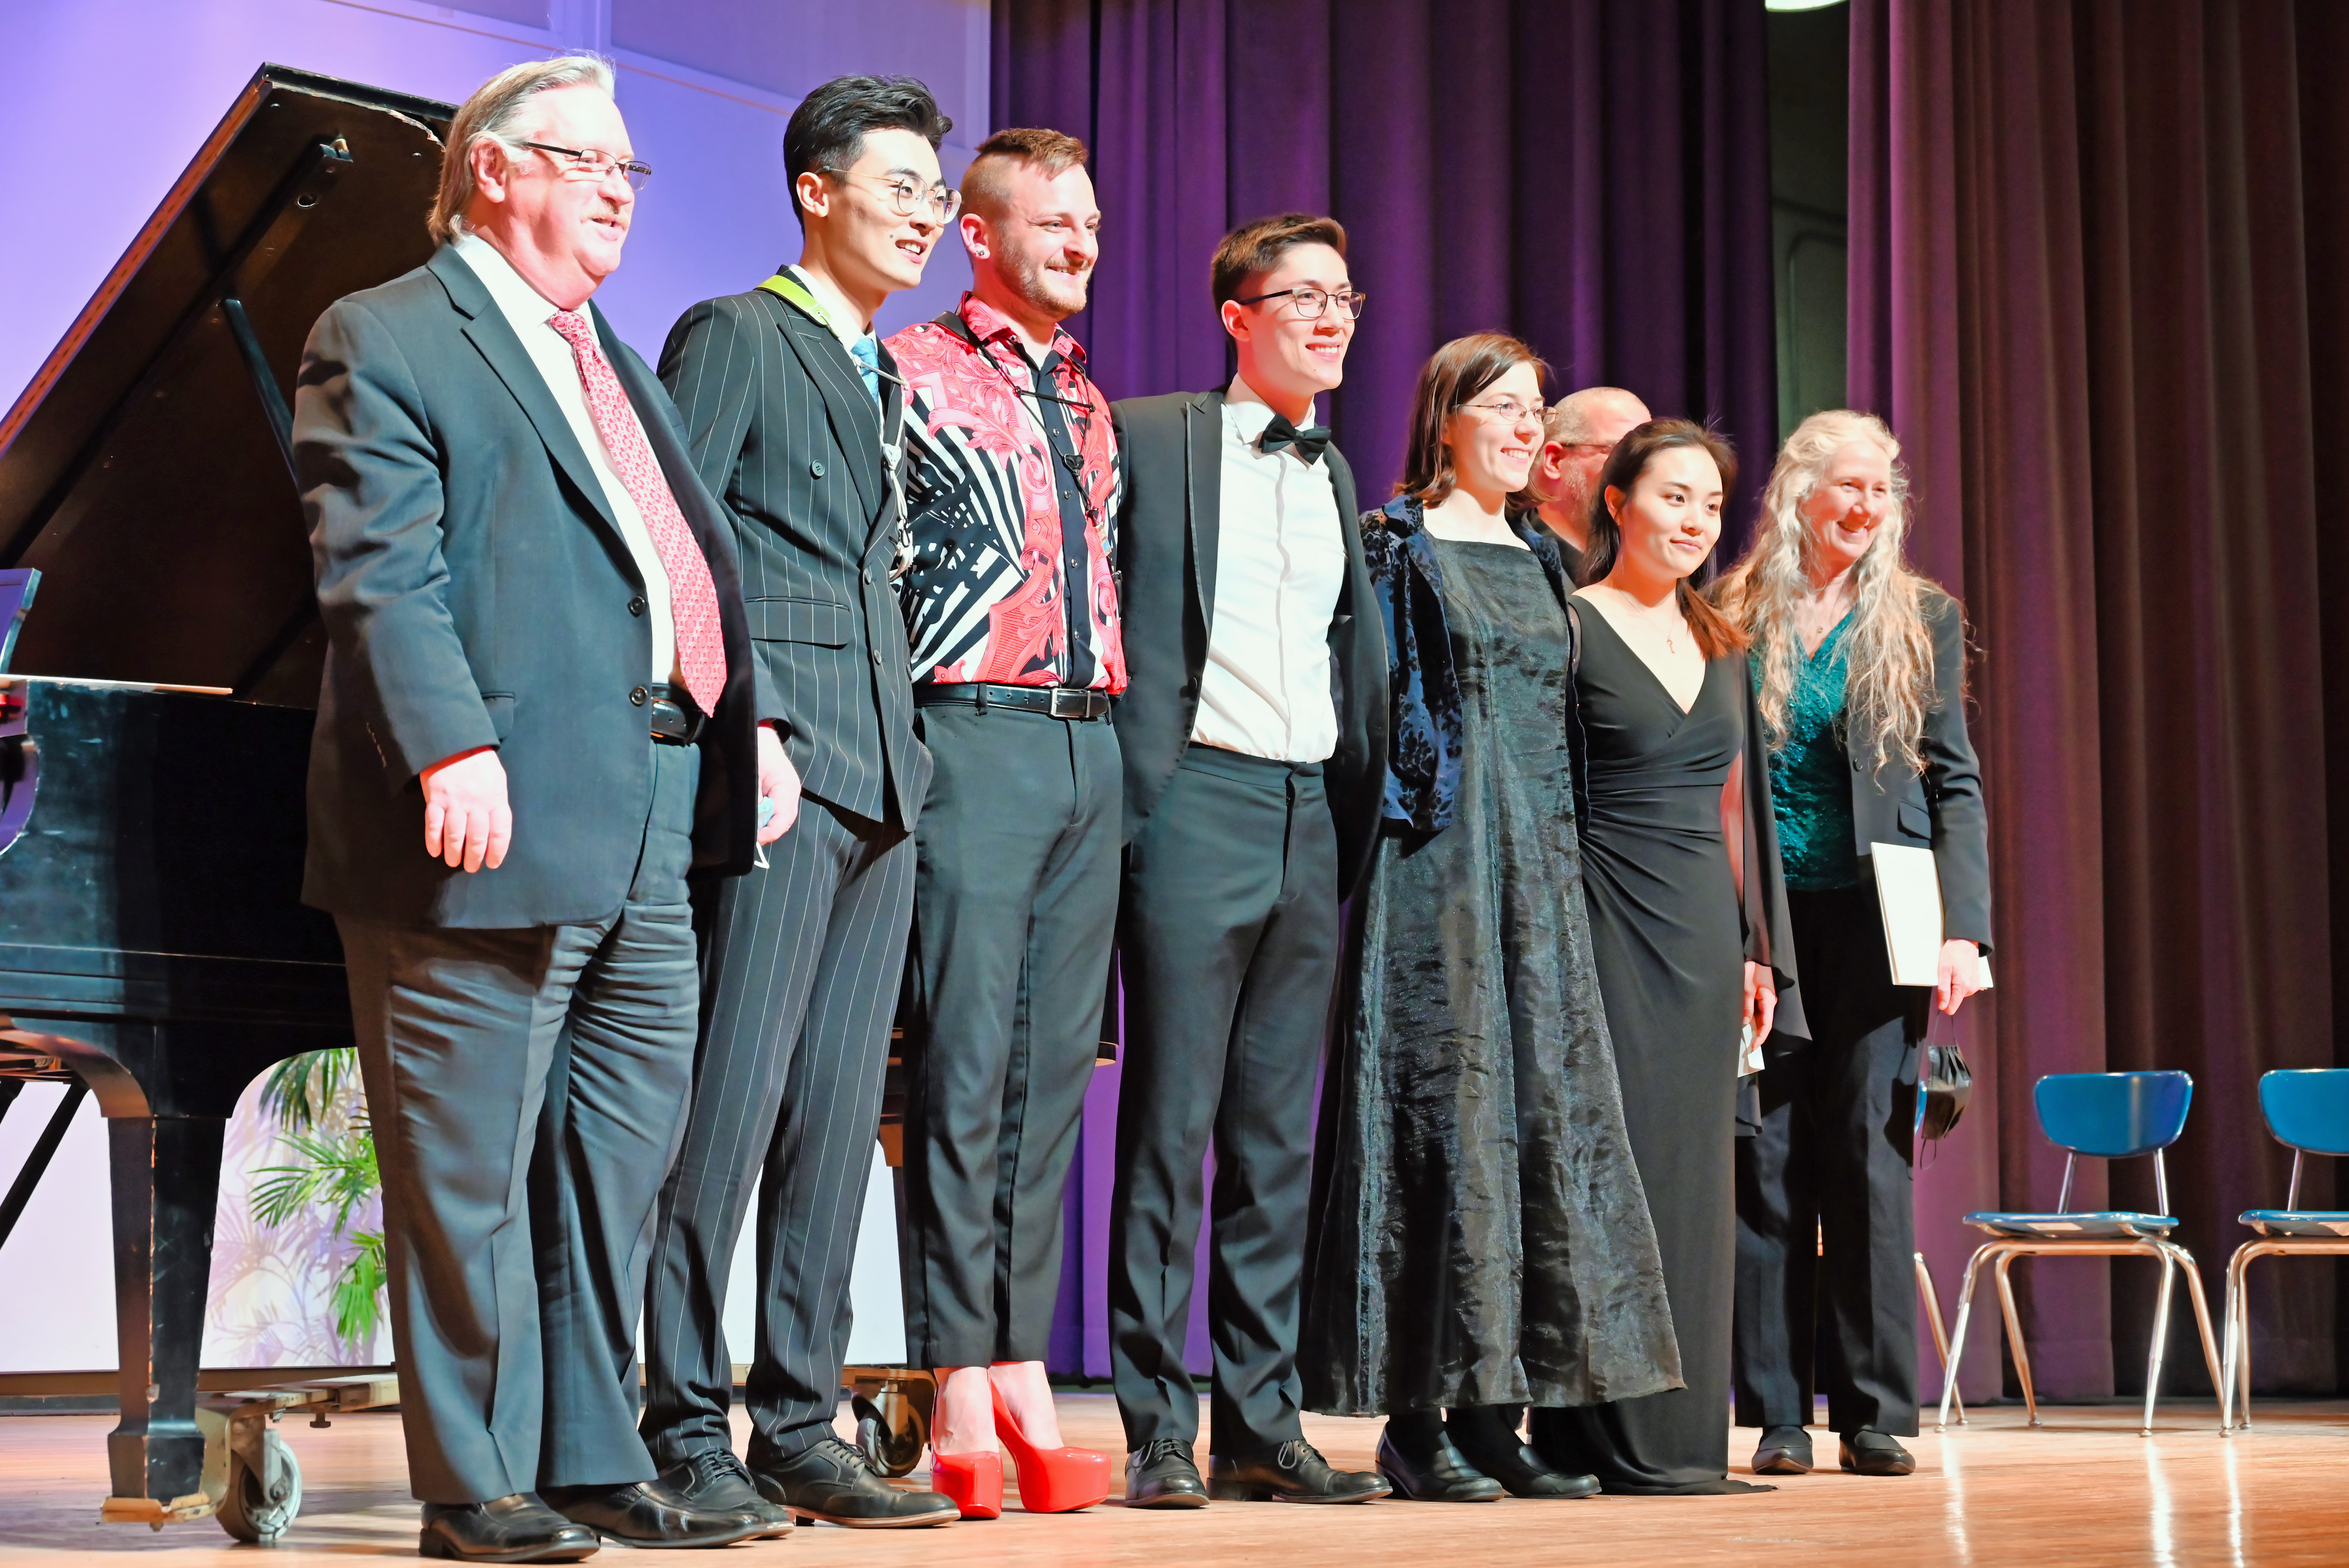 A photograph of finalists on stage at the music competition